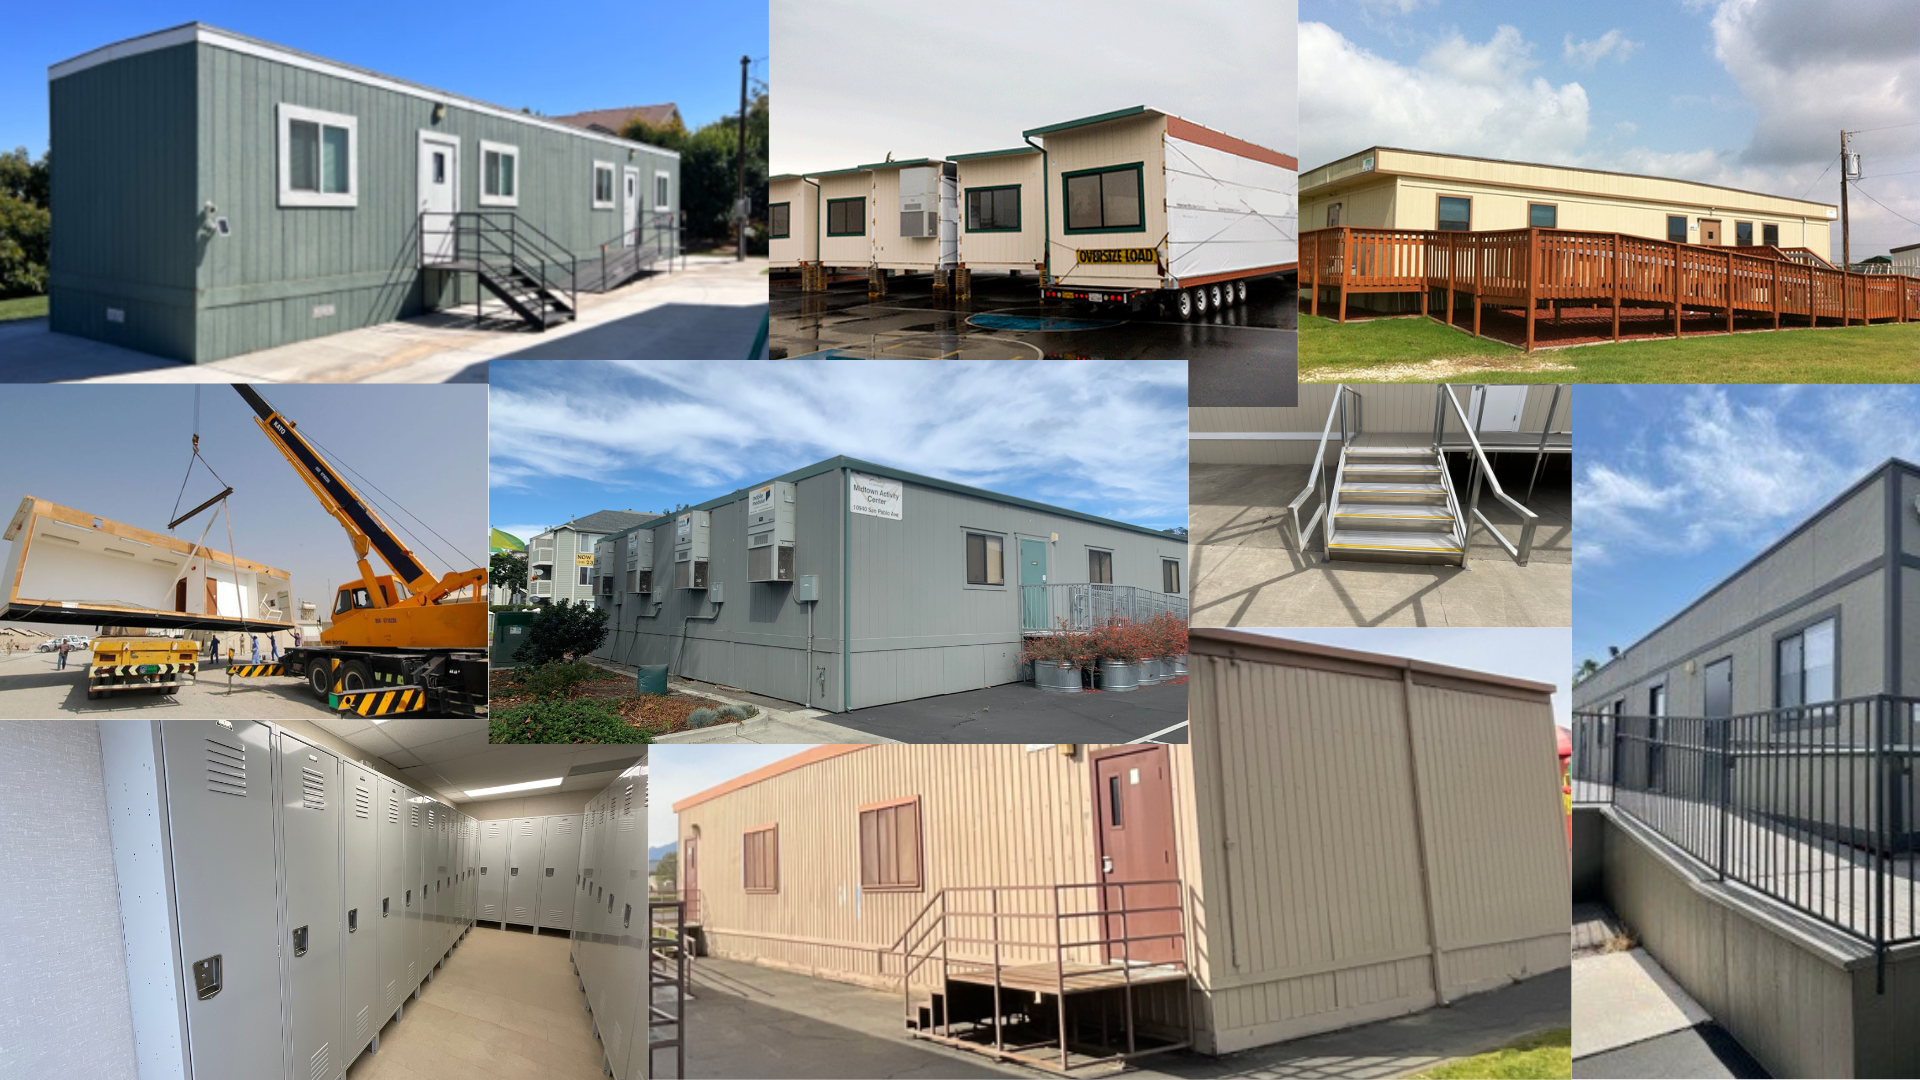 Get prices to rent or buy from modular building suppliers in your state